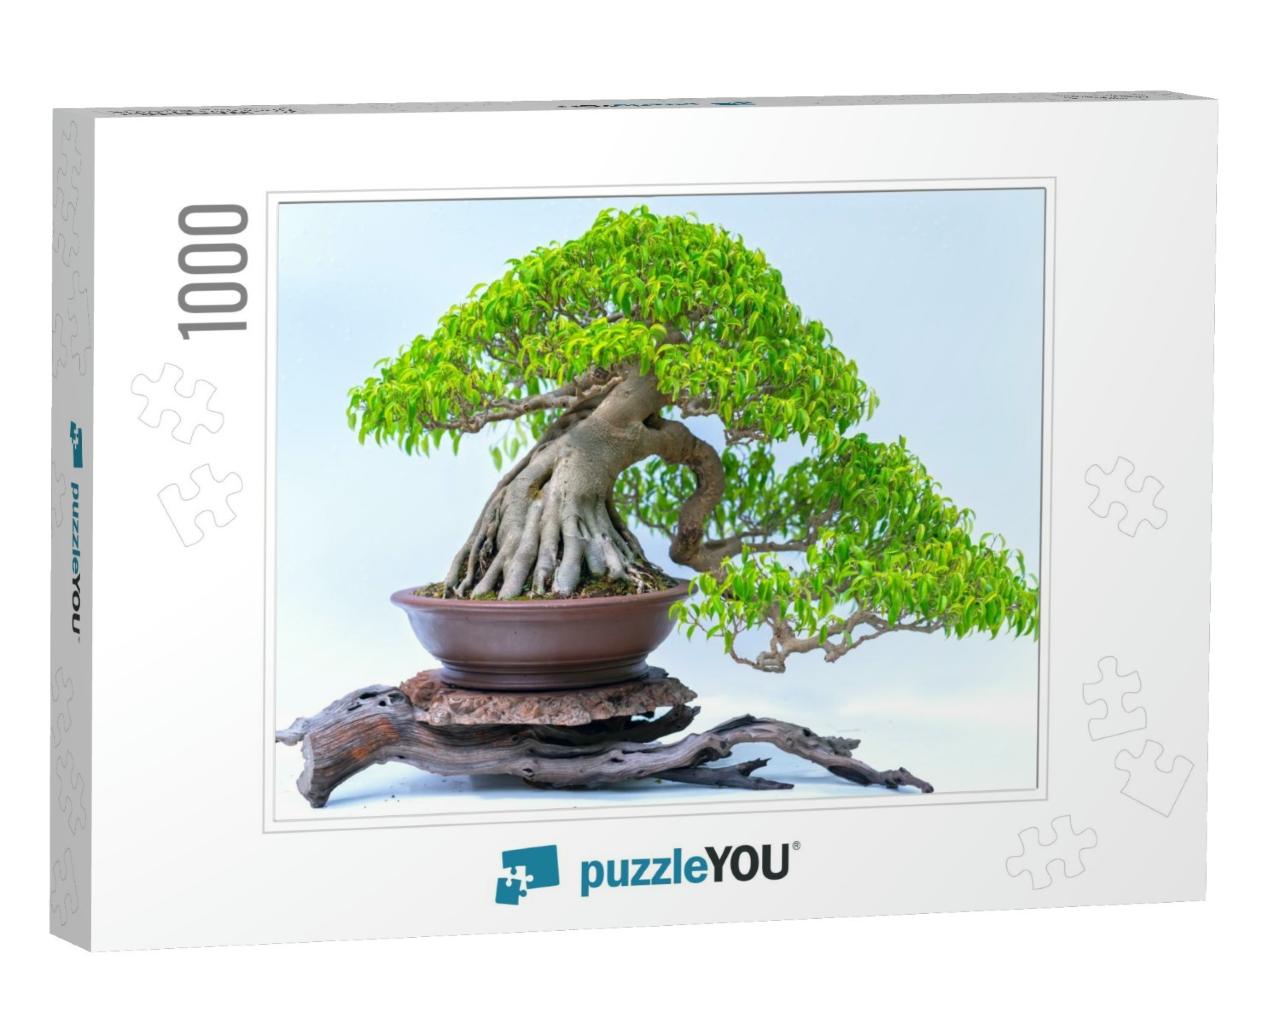 Green Old Bonsai Tree Isolated on White Background in a P... Jigsaw Puzzle with 1000 pieces